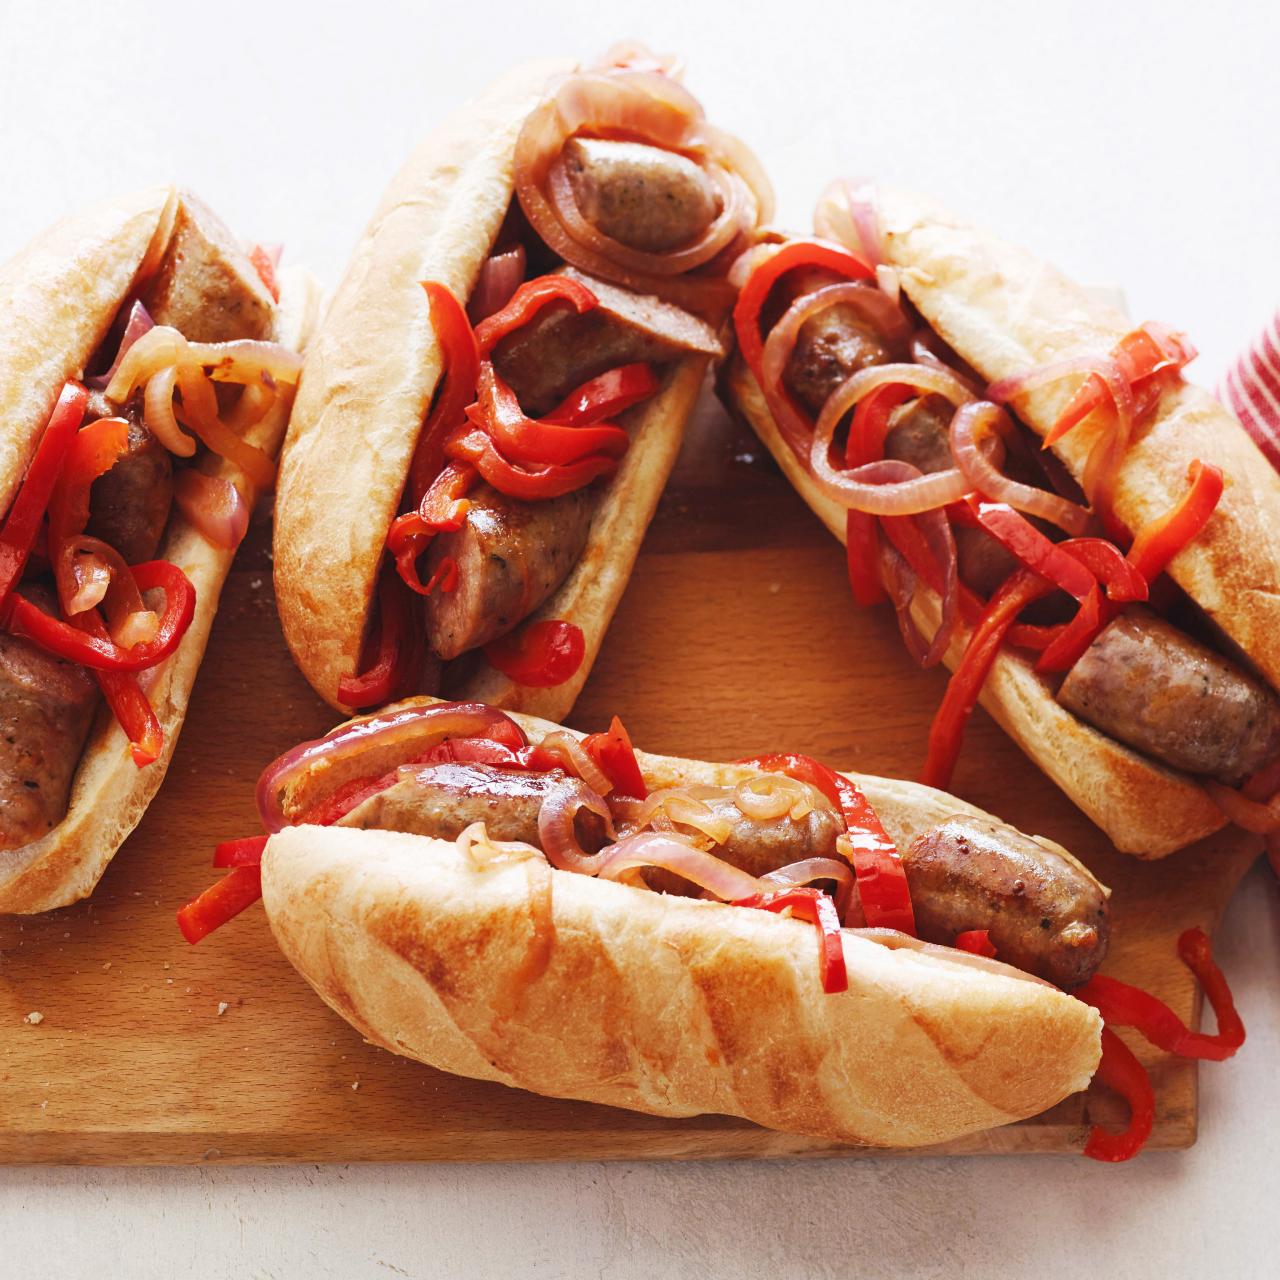 https://food.fnr.sndimg.com/content/dam/images/food/fullset/2014/8/22/0/YW0504_Sausage-and-Peppers_s4x3.jpg.rend.hgtvcom.1280.1280.suffix/1438989609358.jpeg